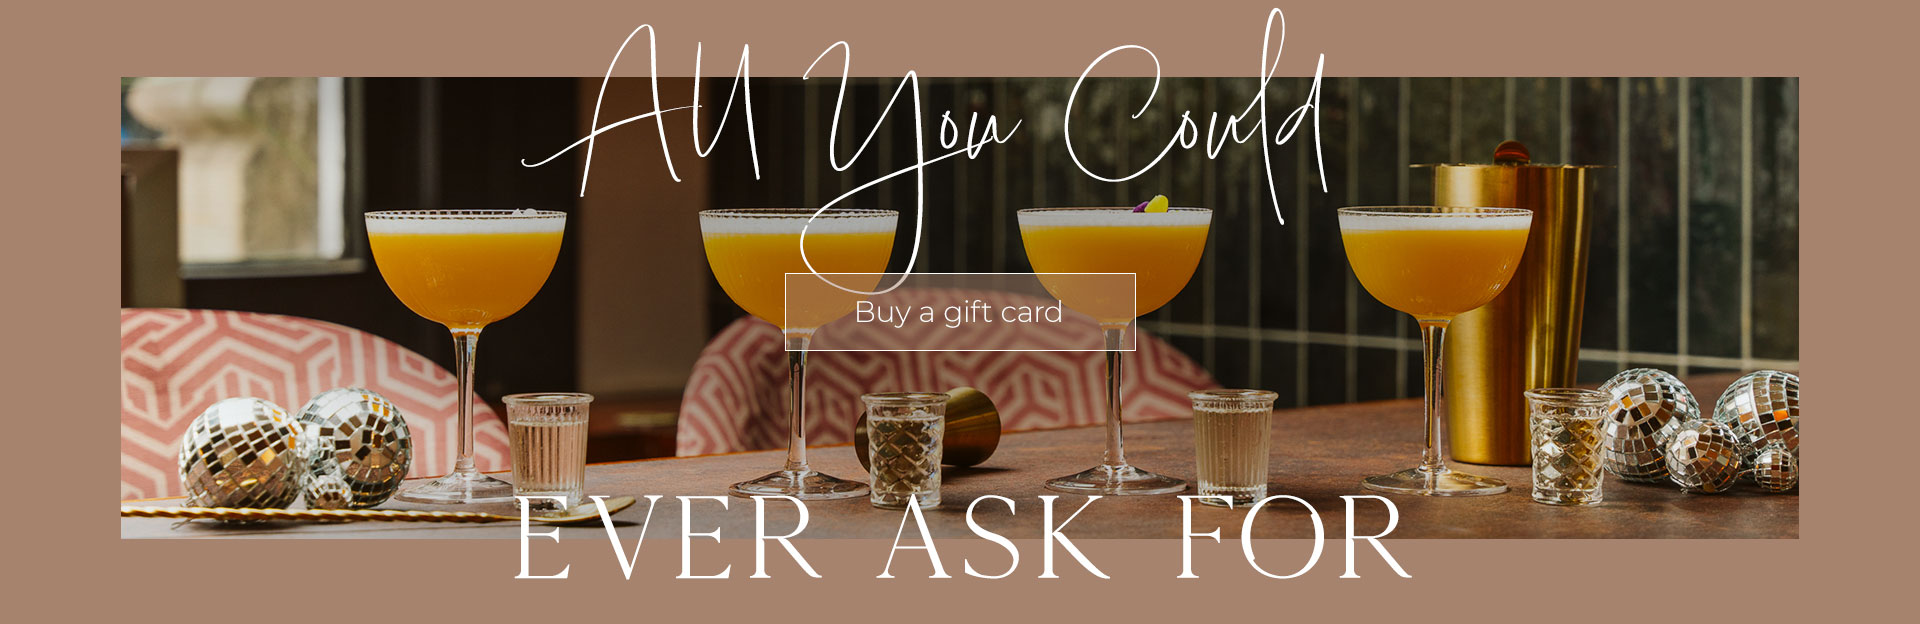 All Bar One Gift Cards at All Bar One Covent Garden